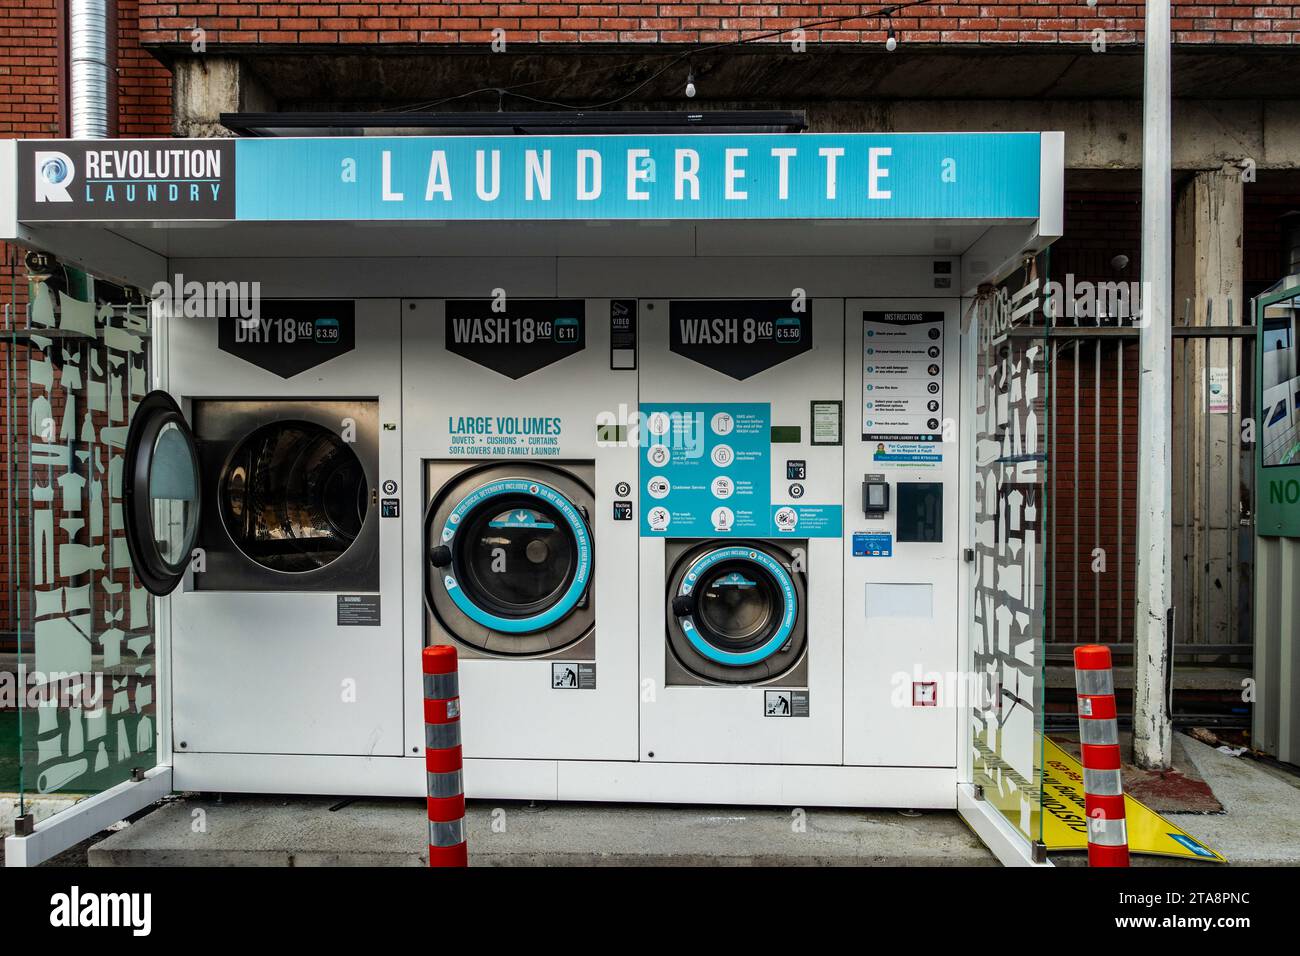 Automated self-service launderette with industrial washing and drying machines in urban setting. Stock Photo